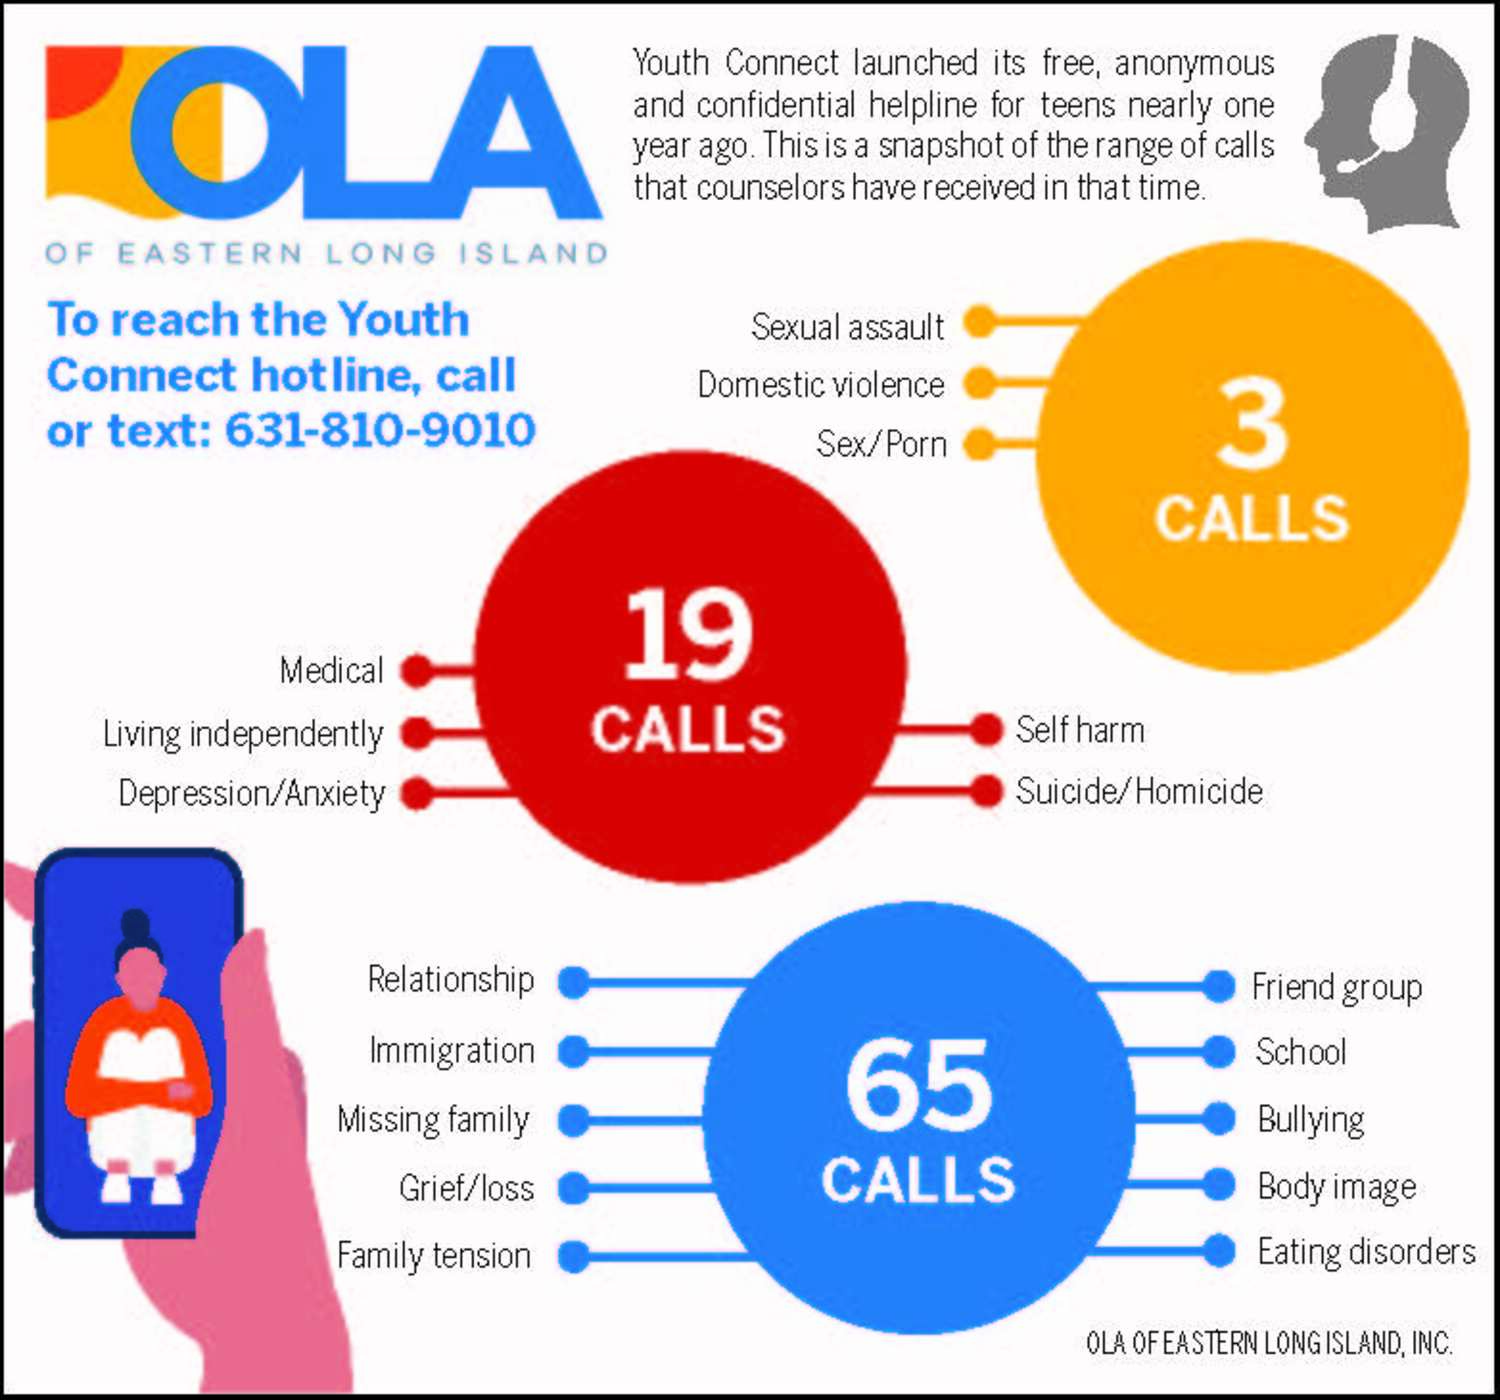 OLA's Youth Connect helpline is approaching its one-year milestone.